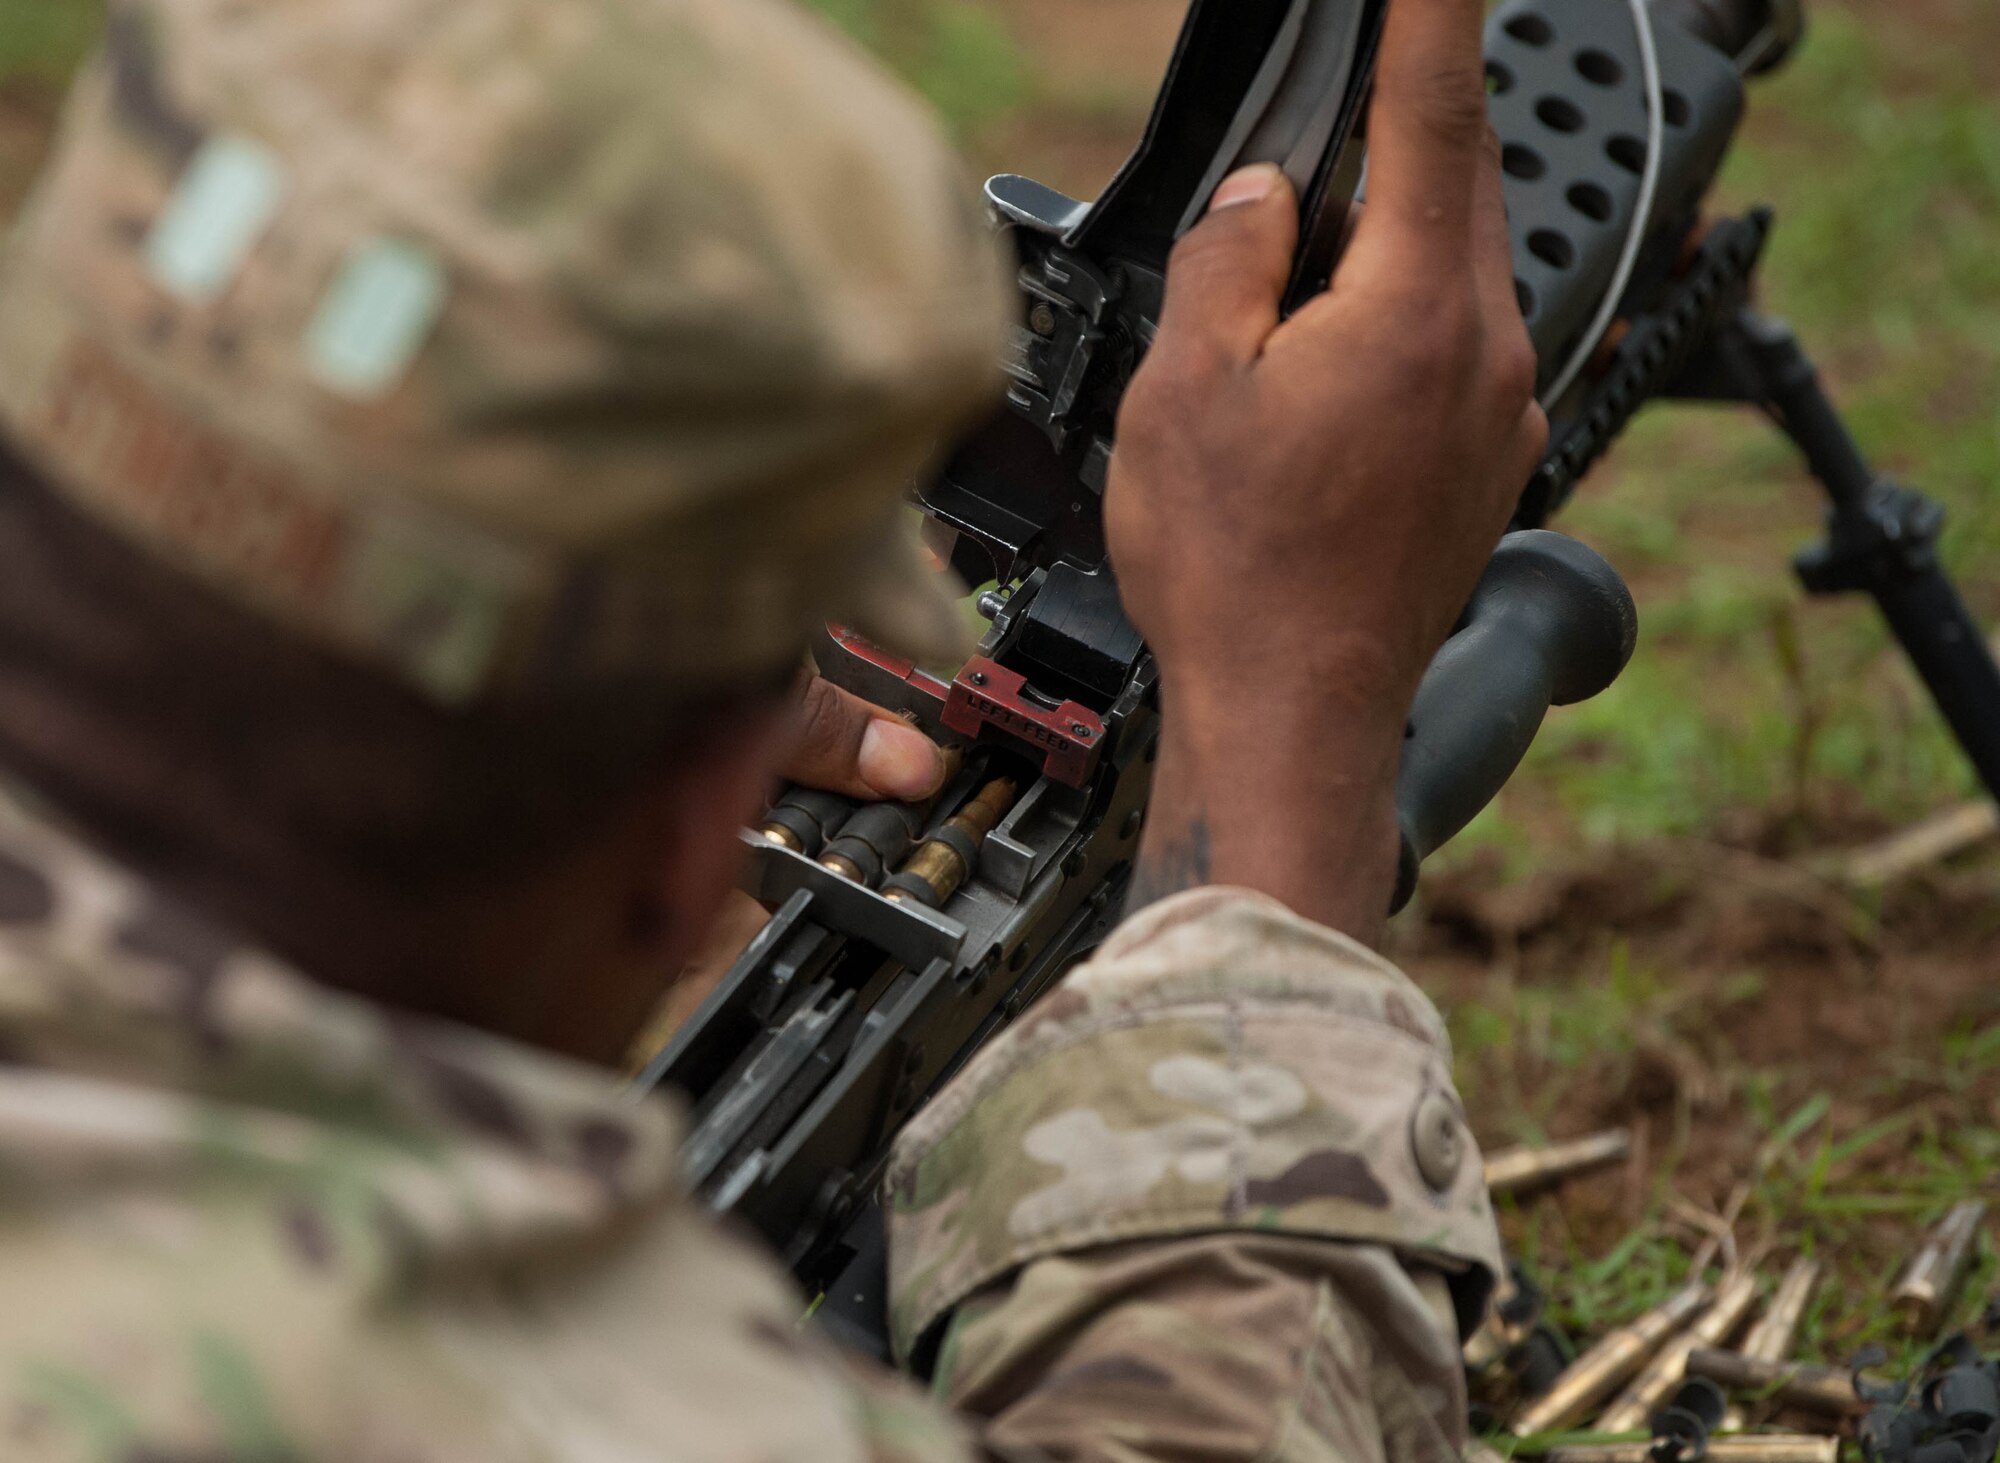 Tech. Sgt. Justin Stinson, Ranger Assessment Course student, loads his weapon and practices un-jamming it during the RAC near Schofield Barracks, Oahu, Hawaii, May 20, 2019. The Airmen who pass the Ranger Assessment Course gain more than a ticket into Ranger School and knowledge on Army tactics – they learn to lead. Throughout the course, Airmen were tested on their ability to perform land navigation, ambush, react to contact and squad attacks. Along with those assessments, the students went on runs and marches of different distances – all leading up to a 12-mile ruck march two days before graduation. (U.S. Air Force photo by Staff Sgt. Hailey Haux)